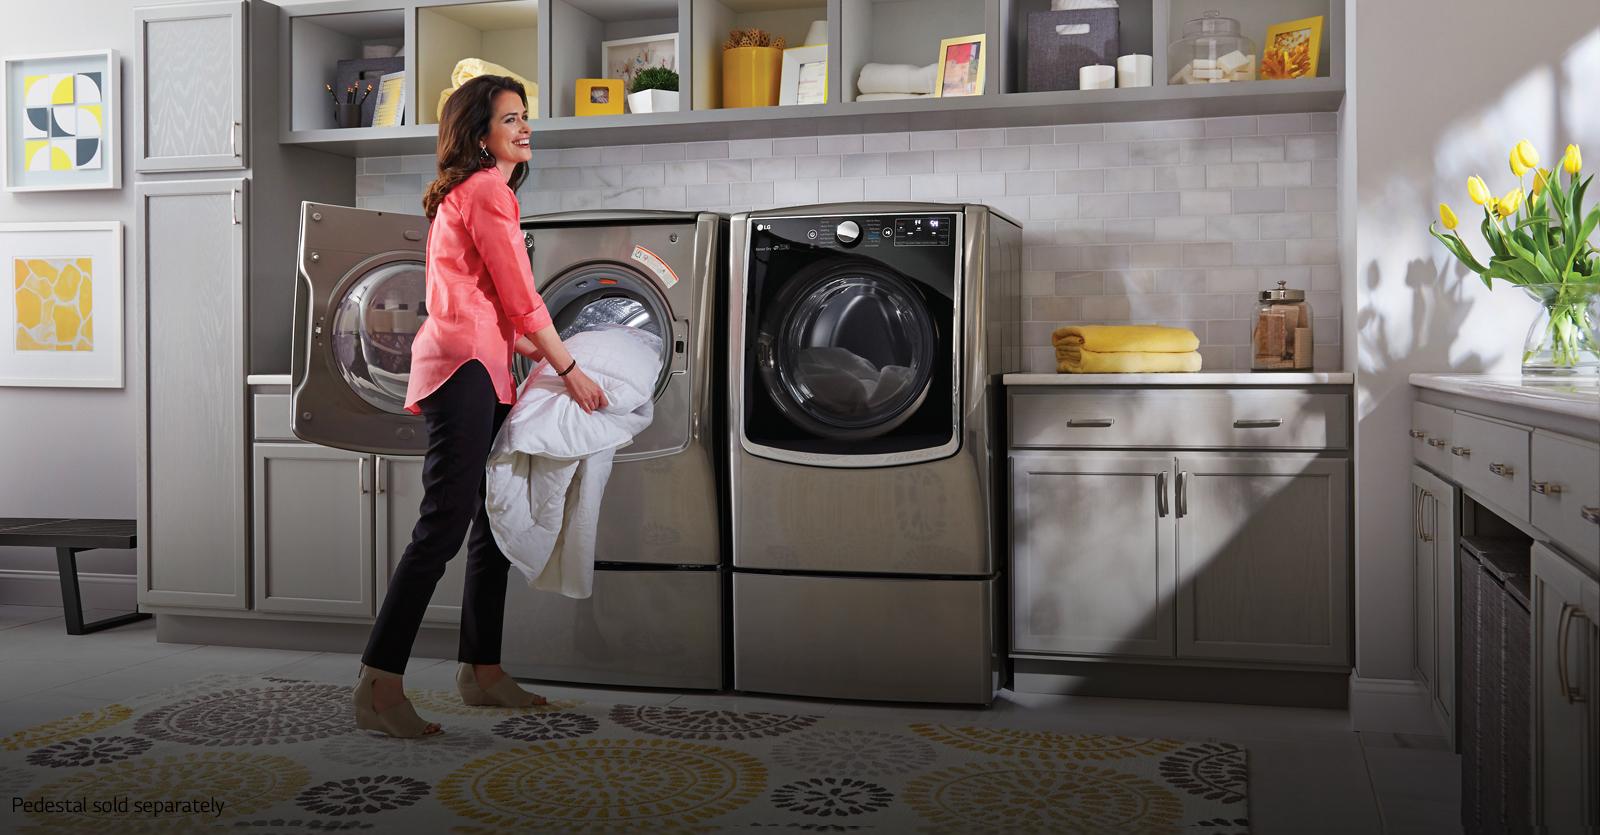 How big of a washing machine do you need to wash a king comforter properly?